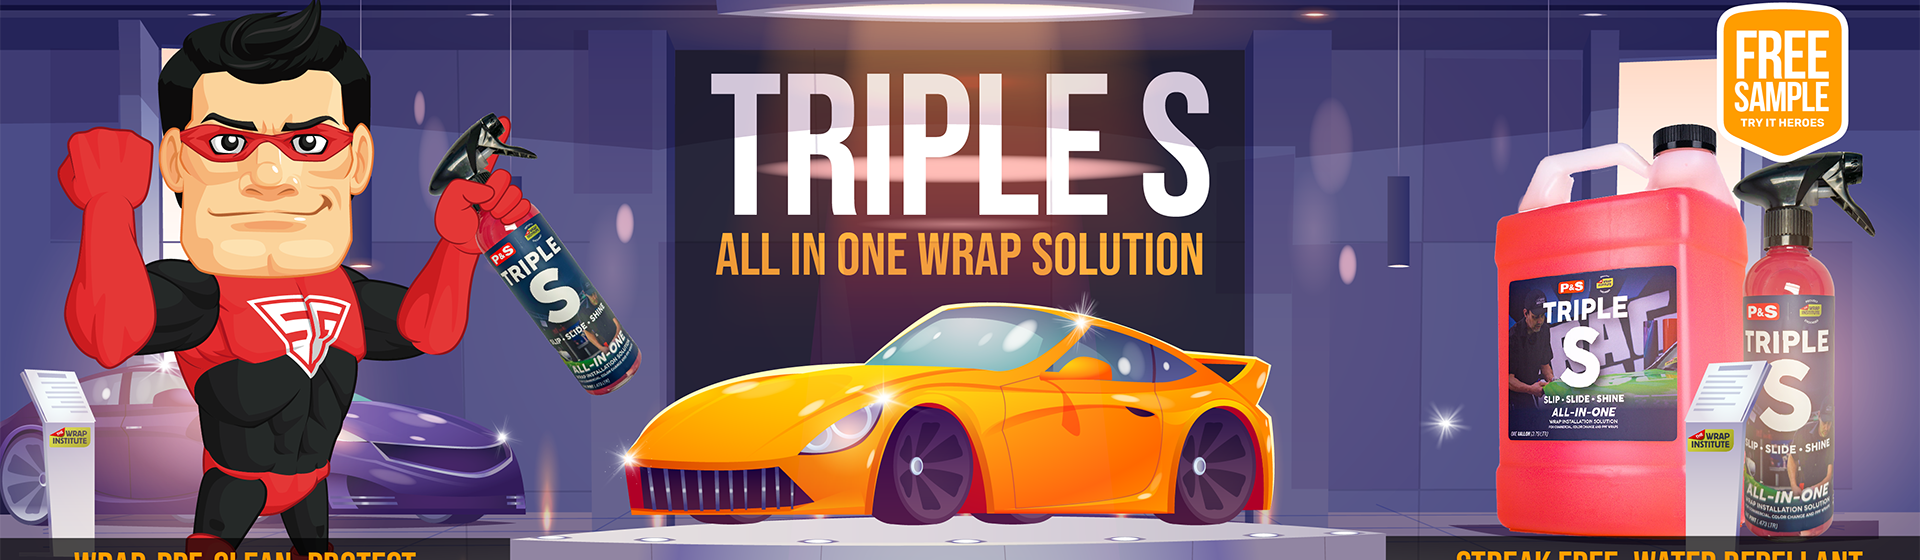 Triple S - The Wrap Solution taking the US by Storm ⚡